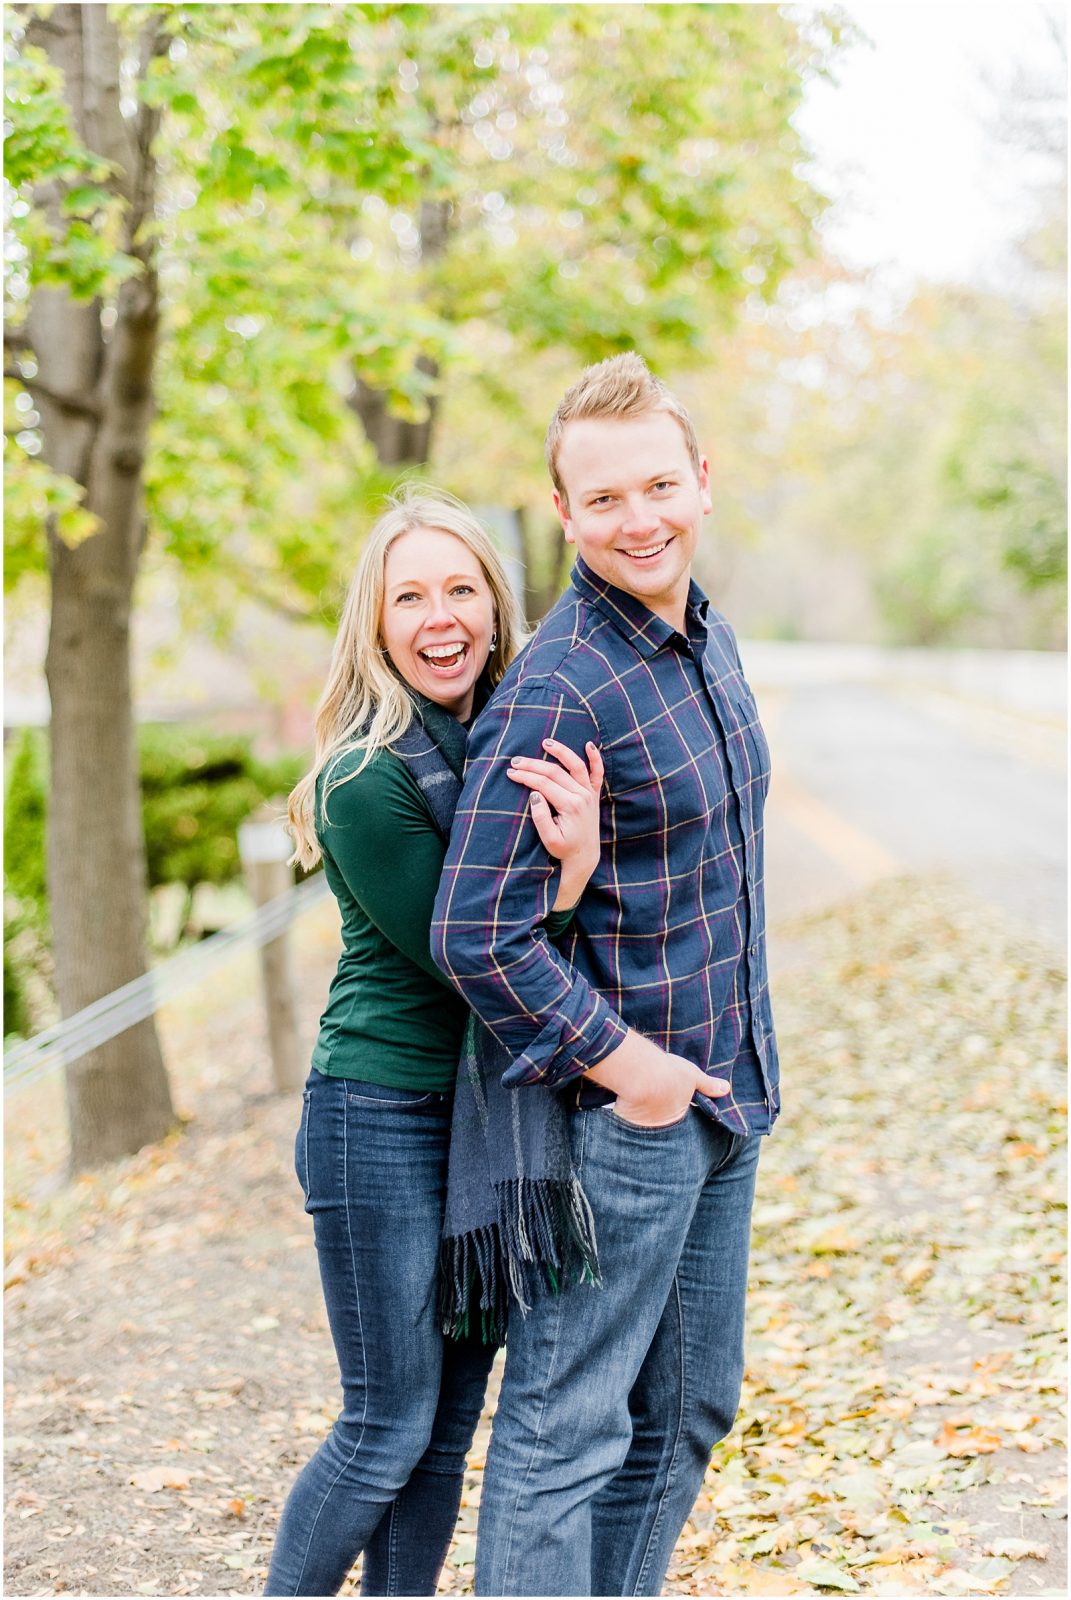 Lorne Park Brantford Engagement Session couple laughing in the fall leaves